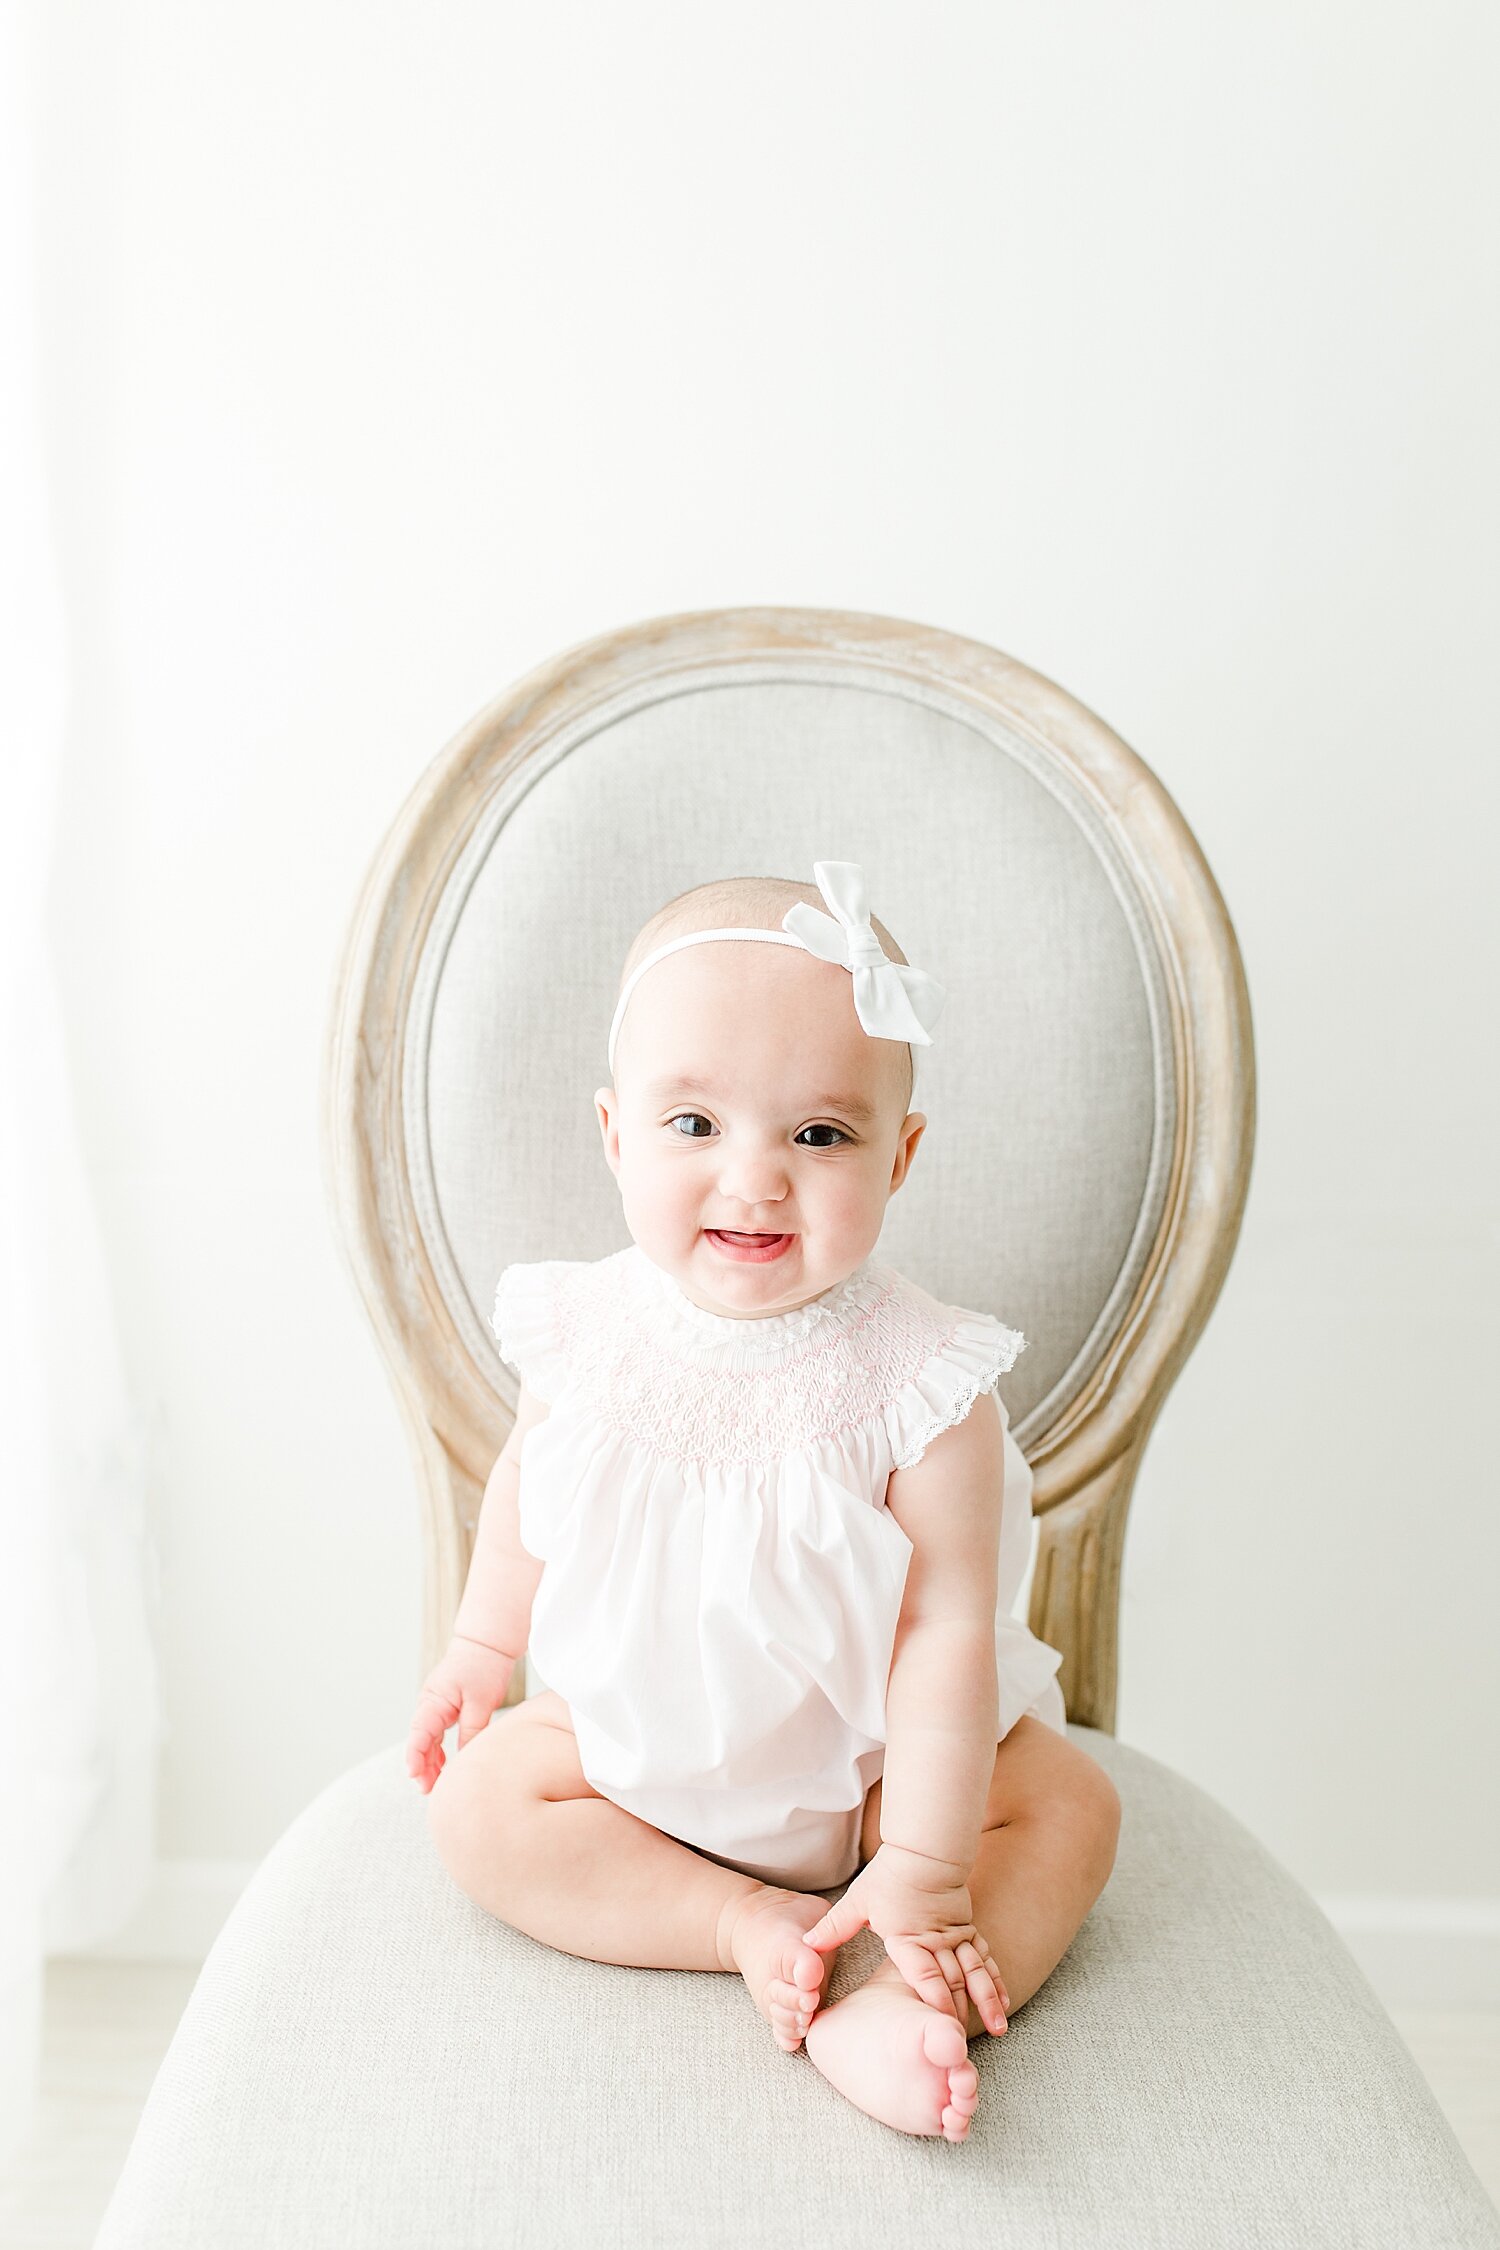 Classic baby portrait in studio in Darien, CT. Photo by Kristin Wood Photography.